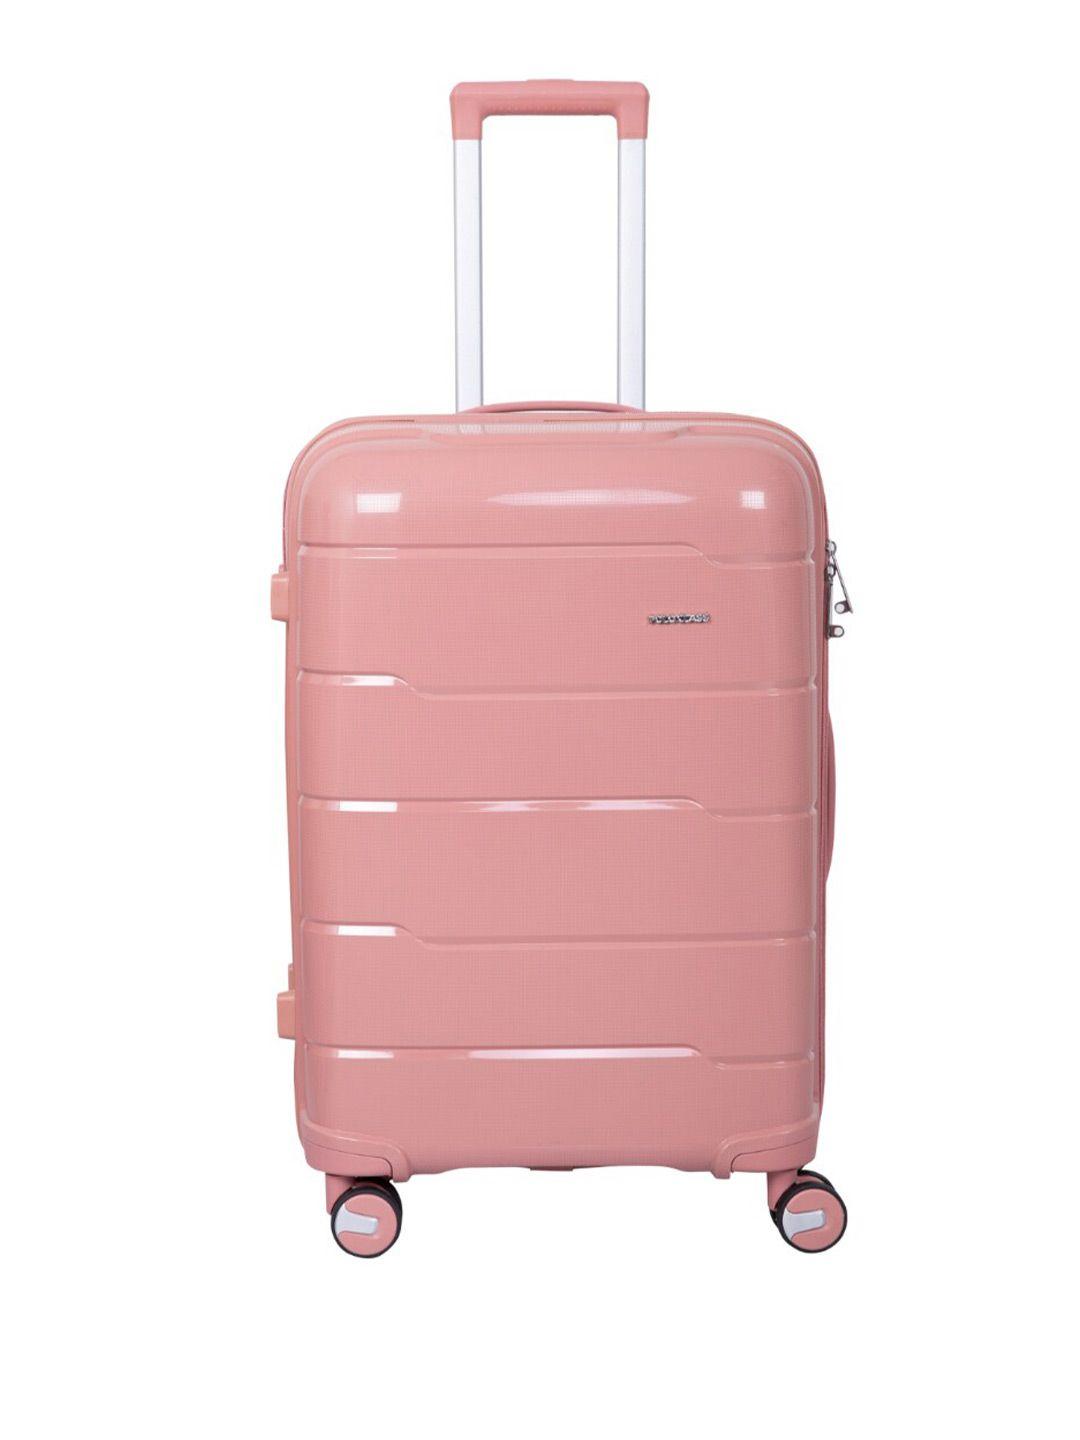 polo class hard-sided large trolley suitcase- 71.12cm